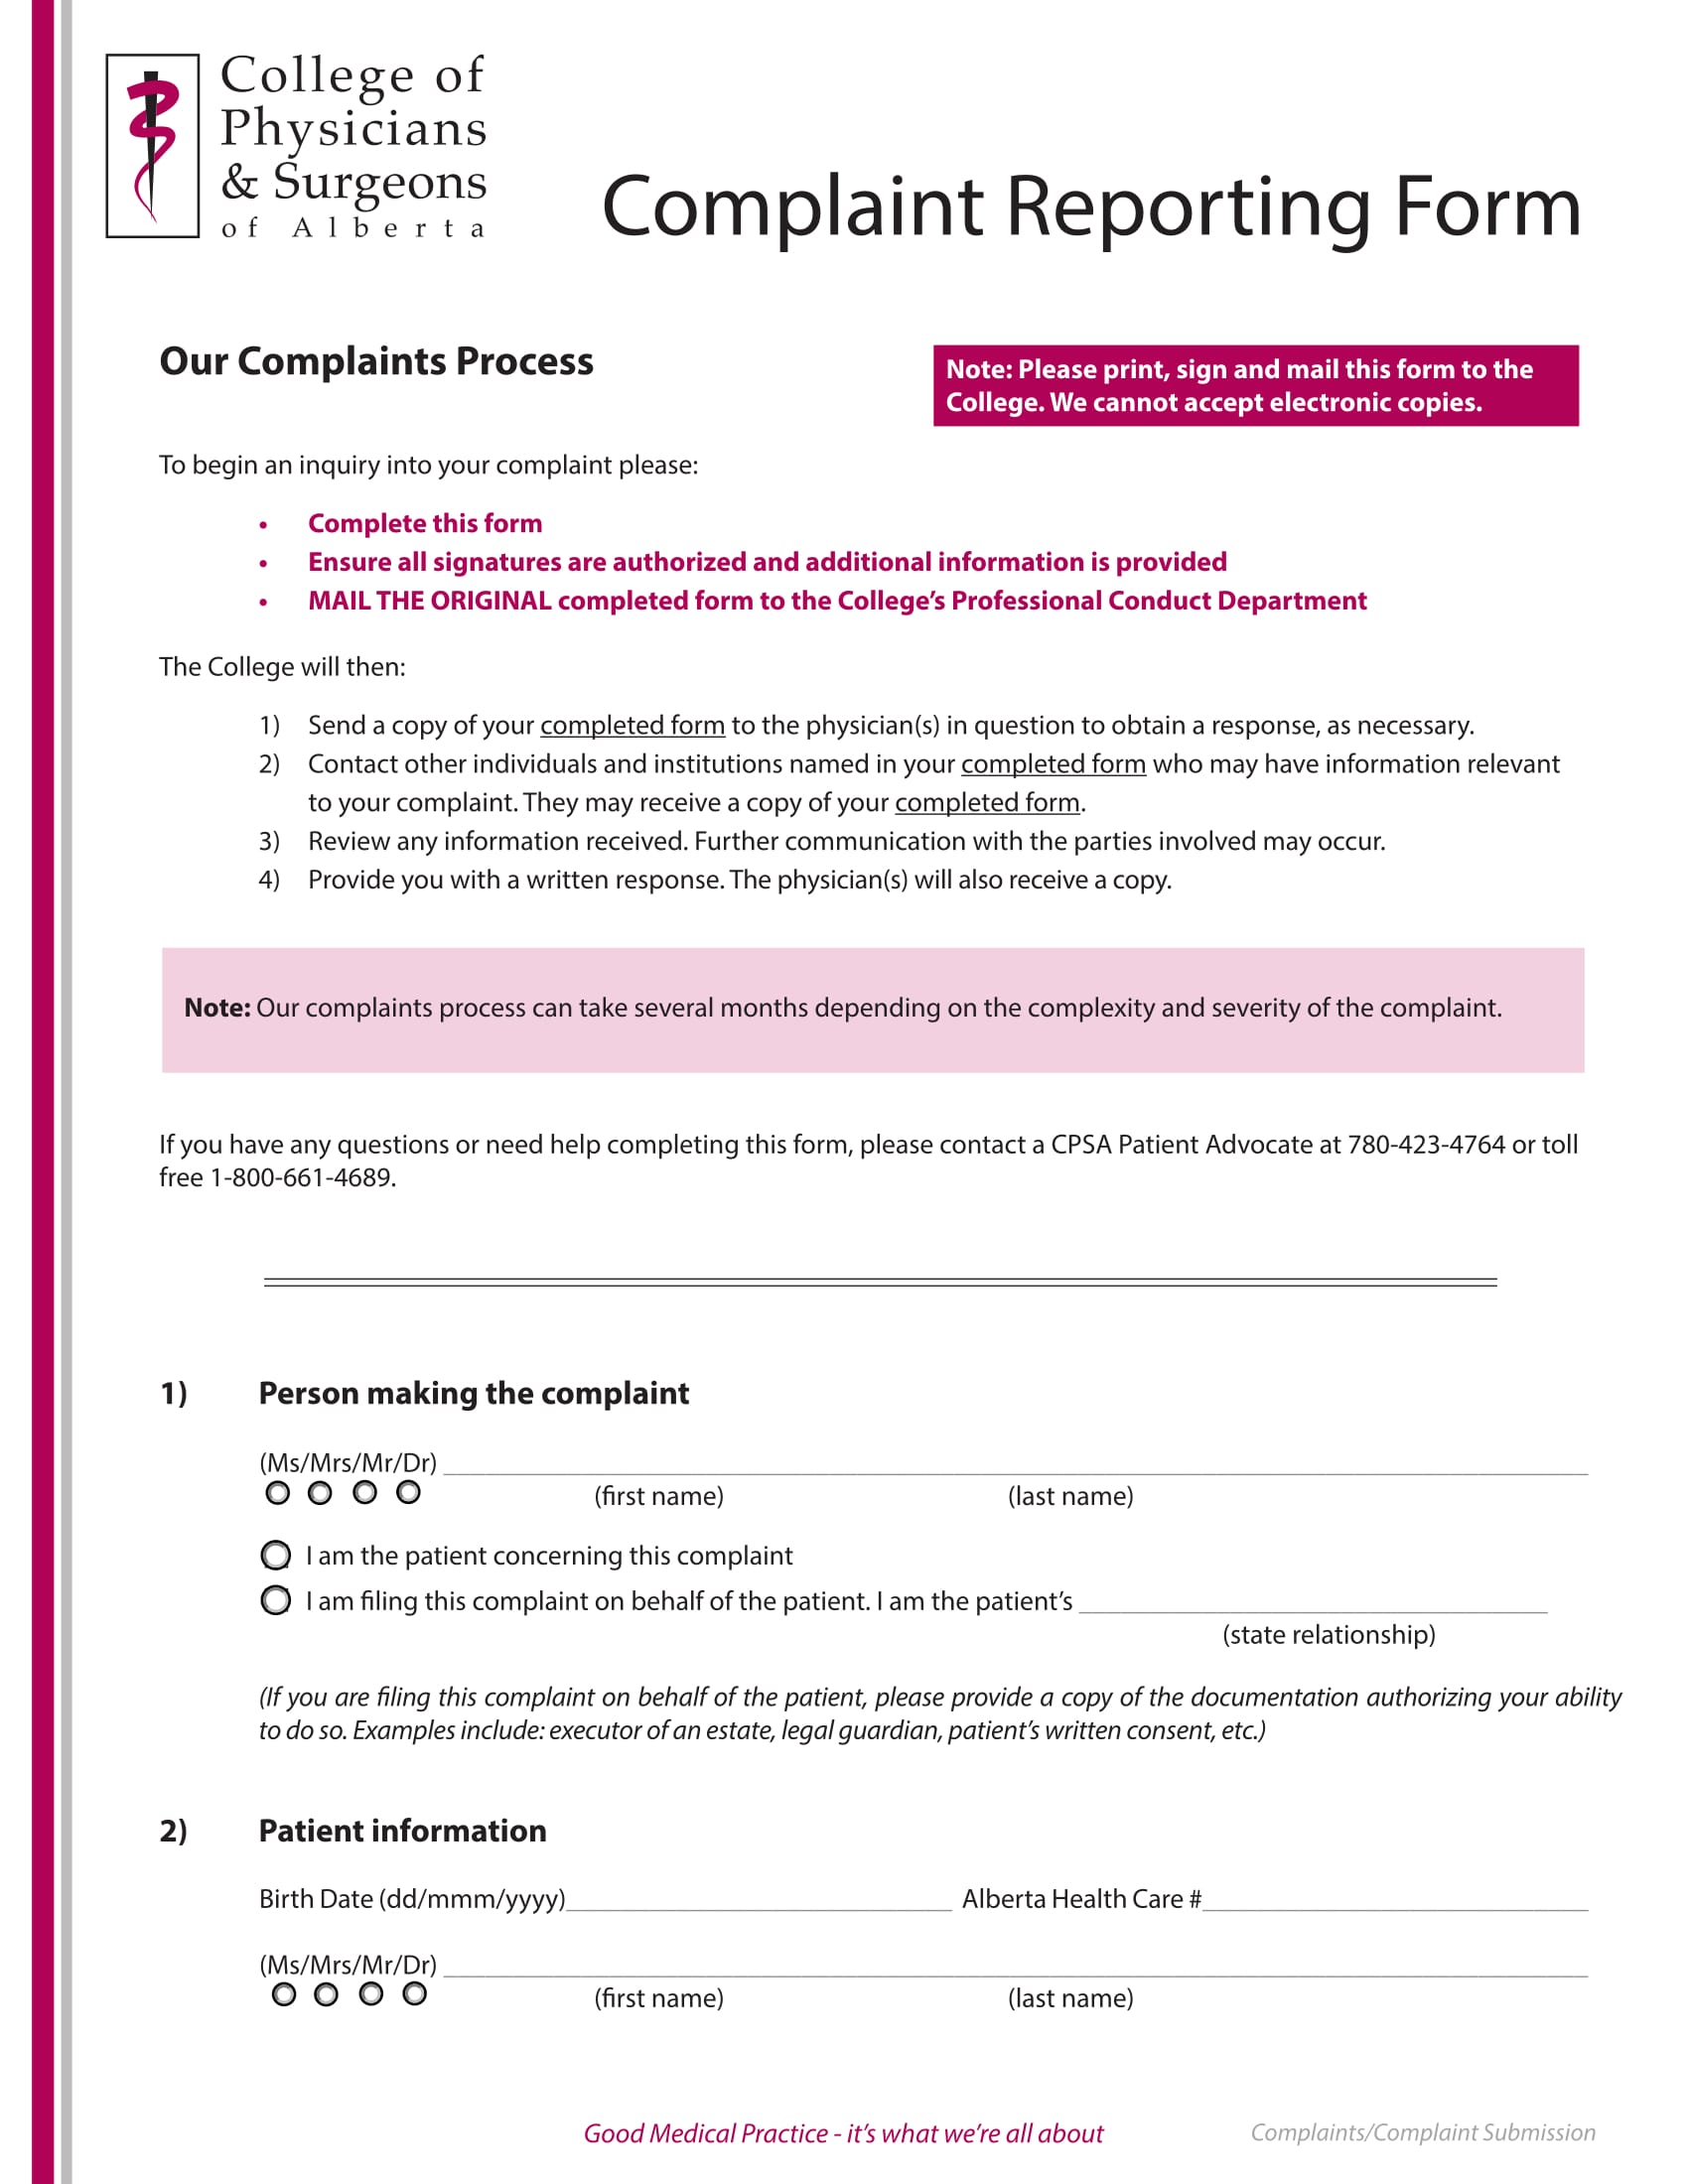 new complaint reporting form samples 1